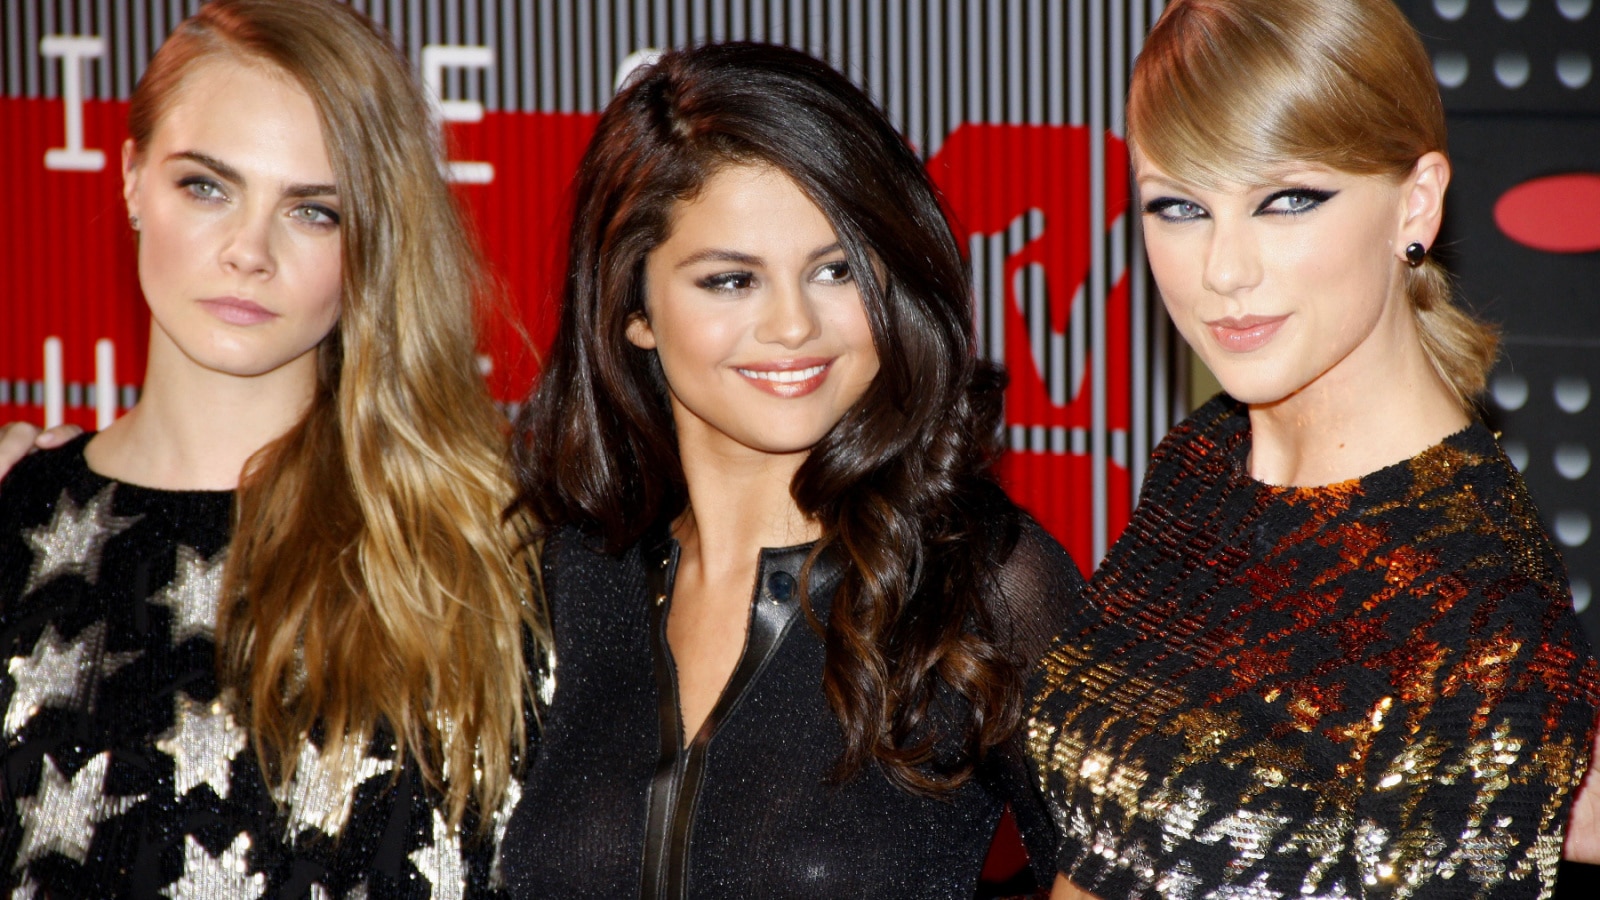 LOS ANGELES, CA - AUGUST 30, 2015: Cara Delevingne, Taylor Swift and Selena Gomez at the 2015 MTV Video Music Awards held at the Microsoft Theater in Los Angeles, USA on August 30, 2015.